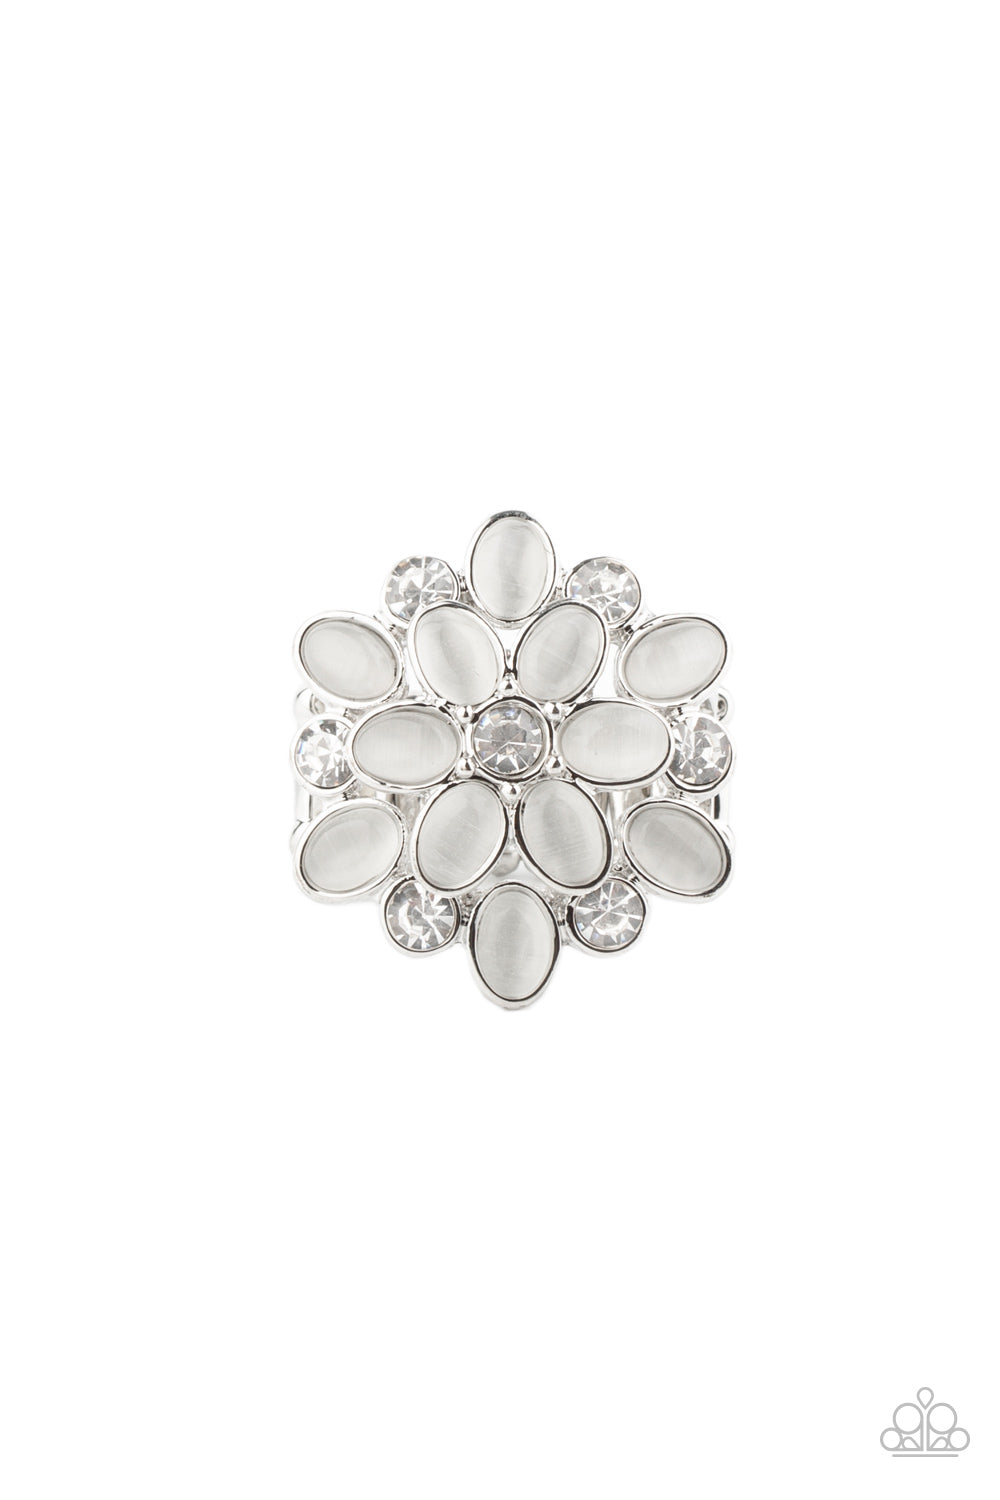 &lt;P&gt;Layers of glassy white rhinestones and glowing white cat\&#039;s eye stone petals stack into a whimsically colorful floral centerpiece atop the finger. Features a stretchy band for a flexible fit. &lt;/P&gt;  

&lt;P&gt; &lt;I&gt;  Sold as one individual ring.
&lt;/I&gt;&lt;/P&gt;

&lt;img src=\&quot;https://d9b54x484lq62.cloudfront.net/paparazzi/shopping/images/517_tag150x115_1.png\&quot; alt=\&quot;New Kit\&quot; align=\&quot;middle\&quot; height=\&quot;50\&quot; width=\&quot;50\&quot;/&gt;